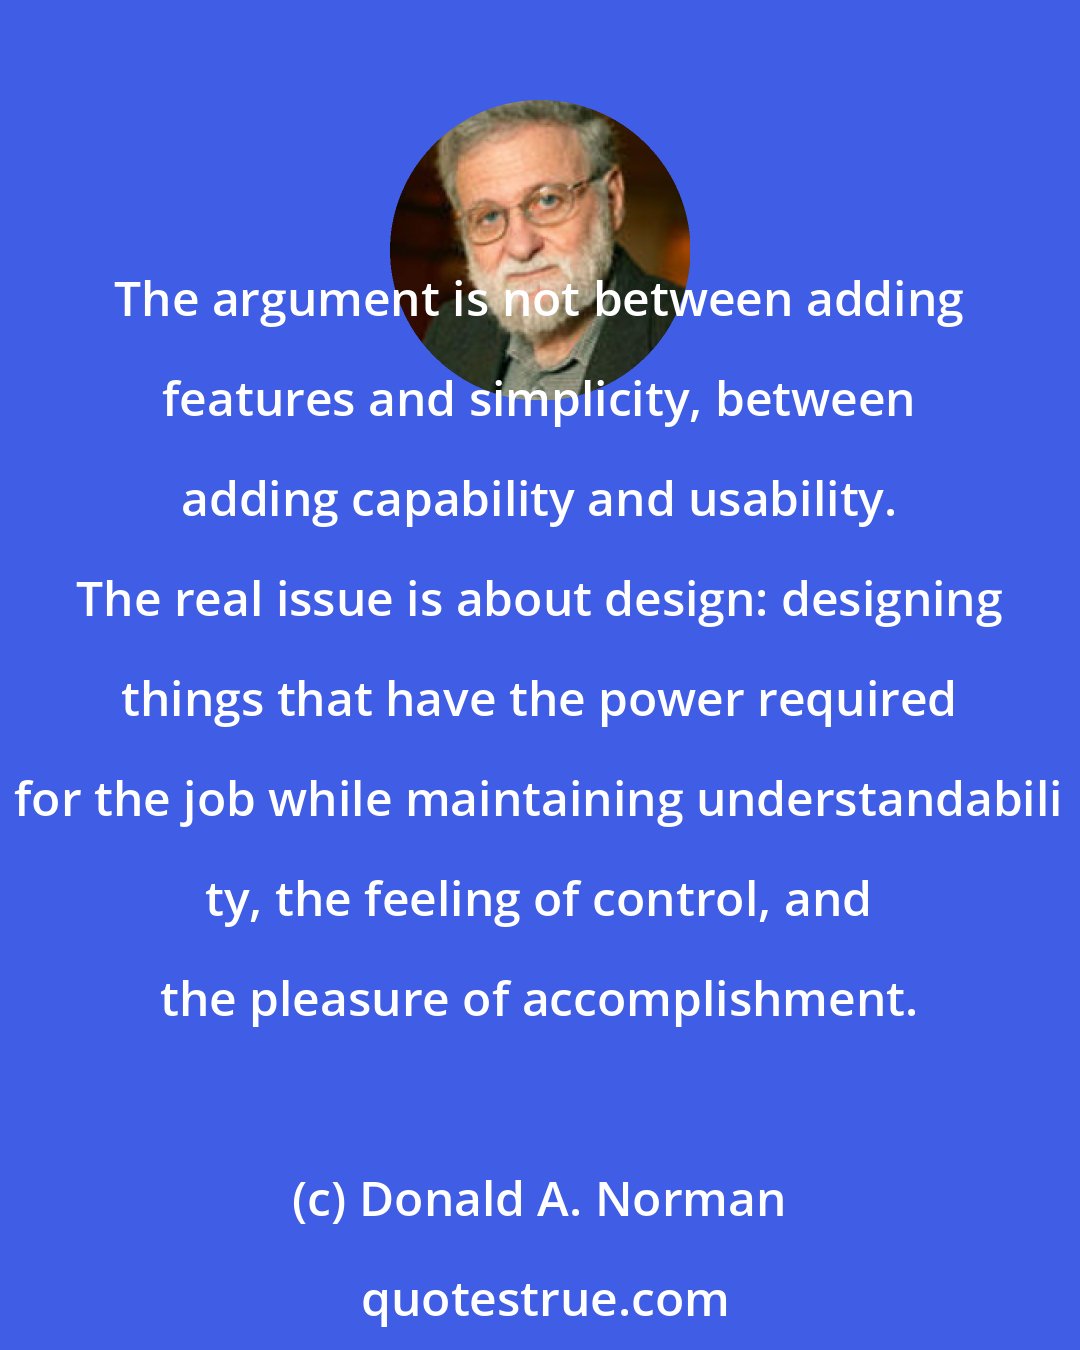 Donald A. Norman: The argument is not between adding features and simplicity, between adding capability and usability. The real issue is about design: designing things that have the power required for the job while maintaining understandabili ty, the feeling of control, and the pleasure of accomplishment.